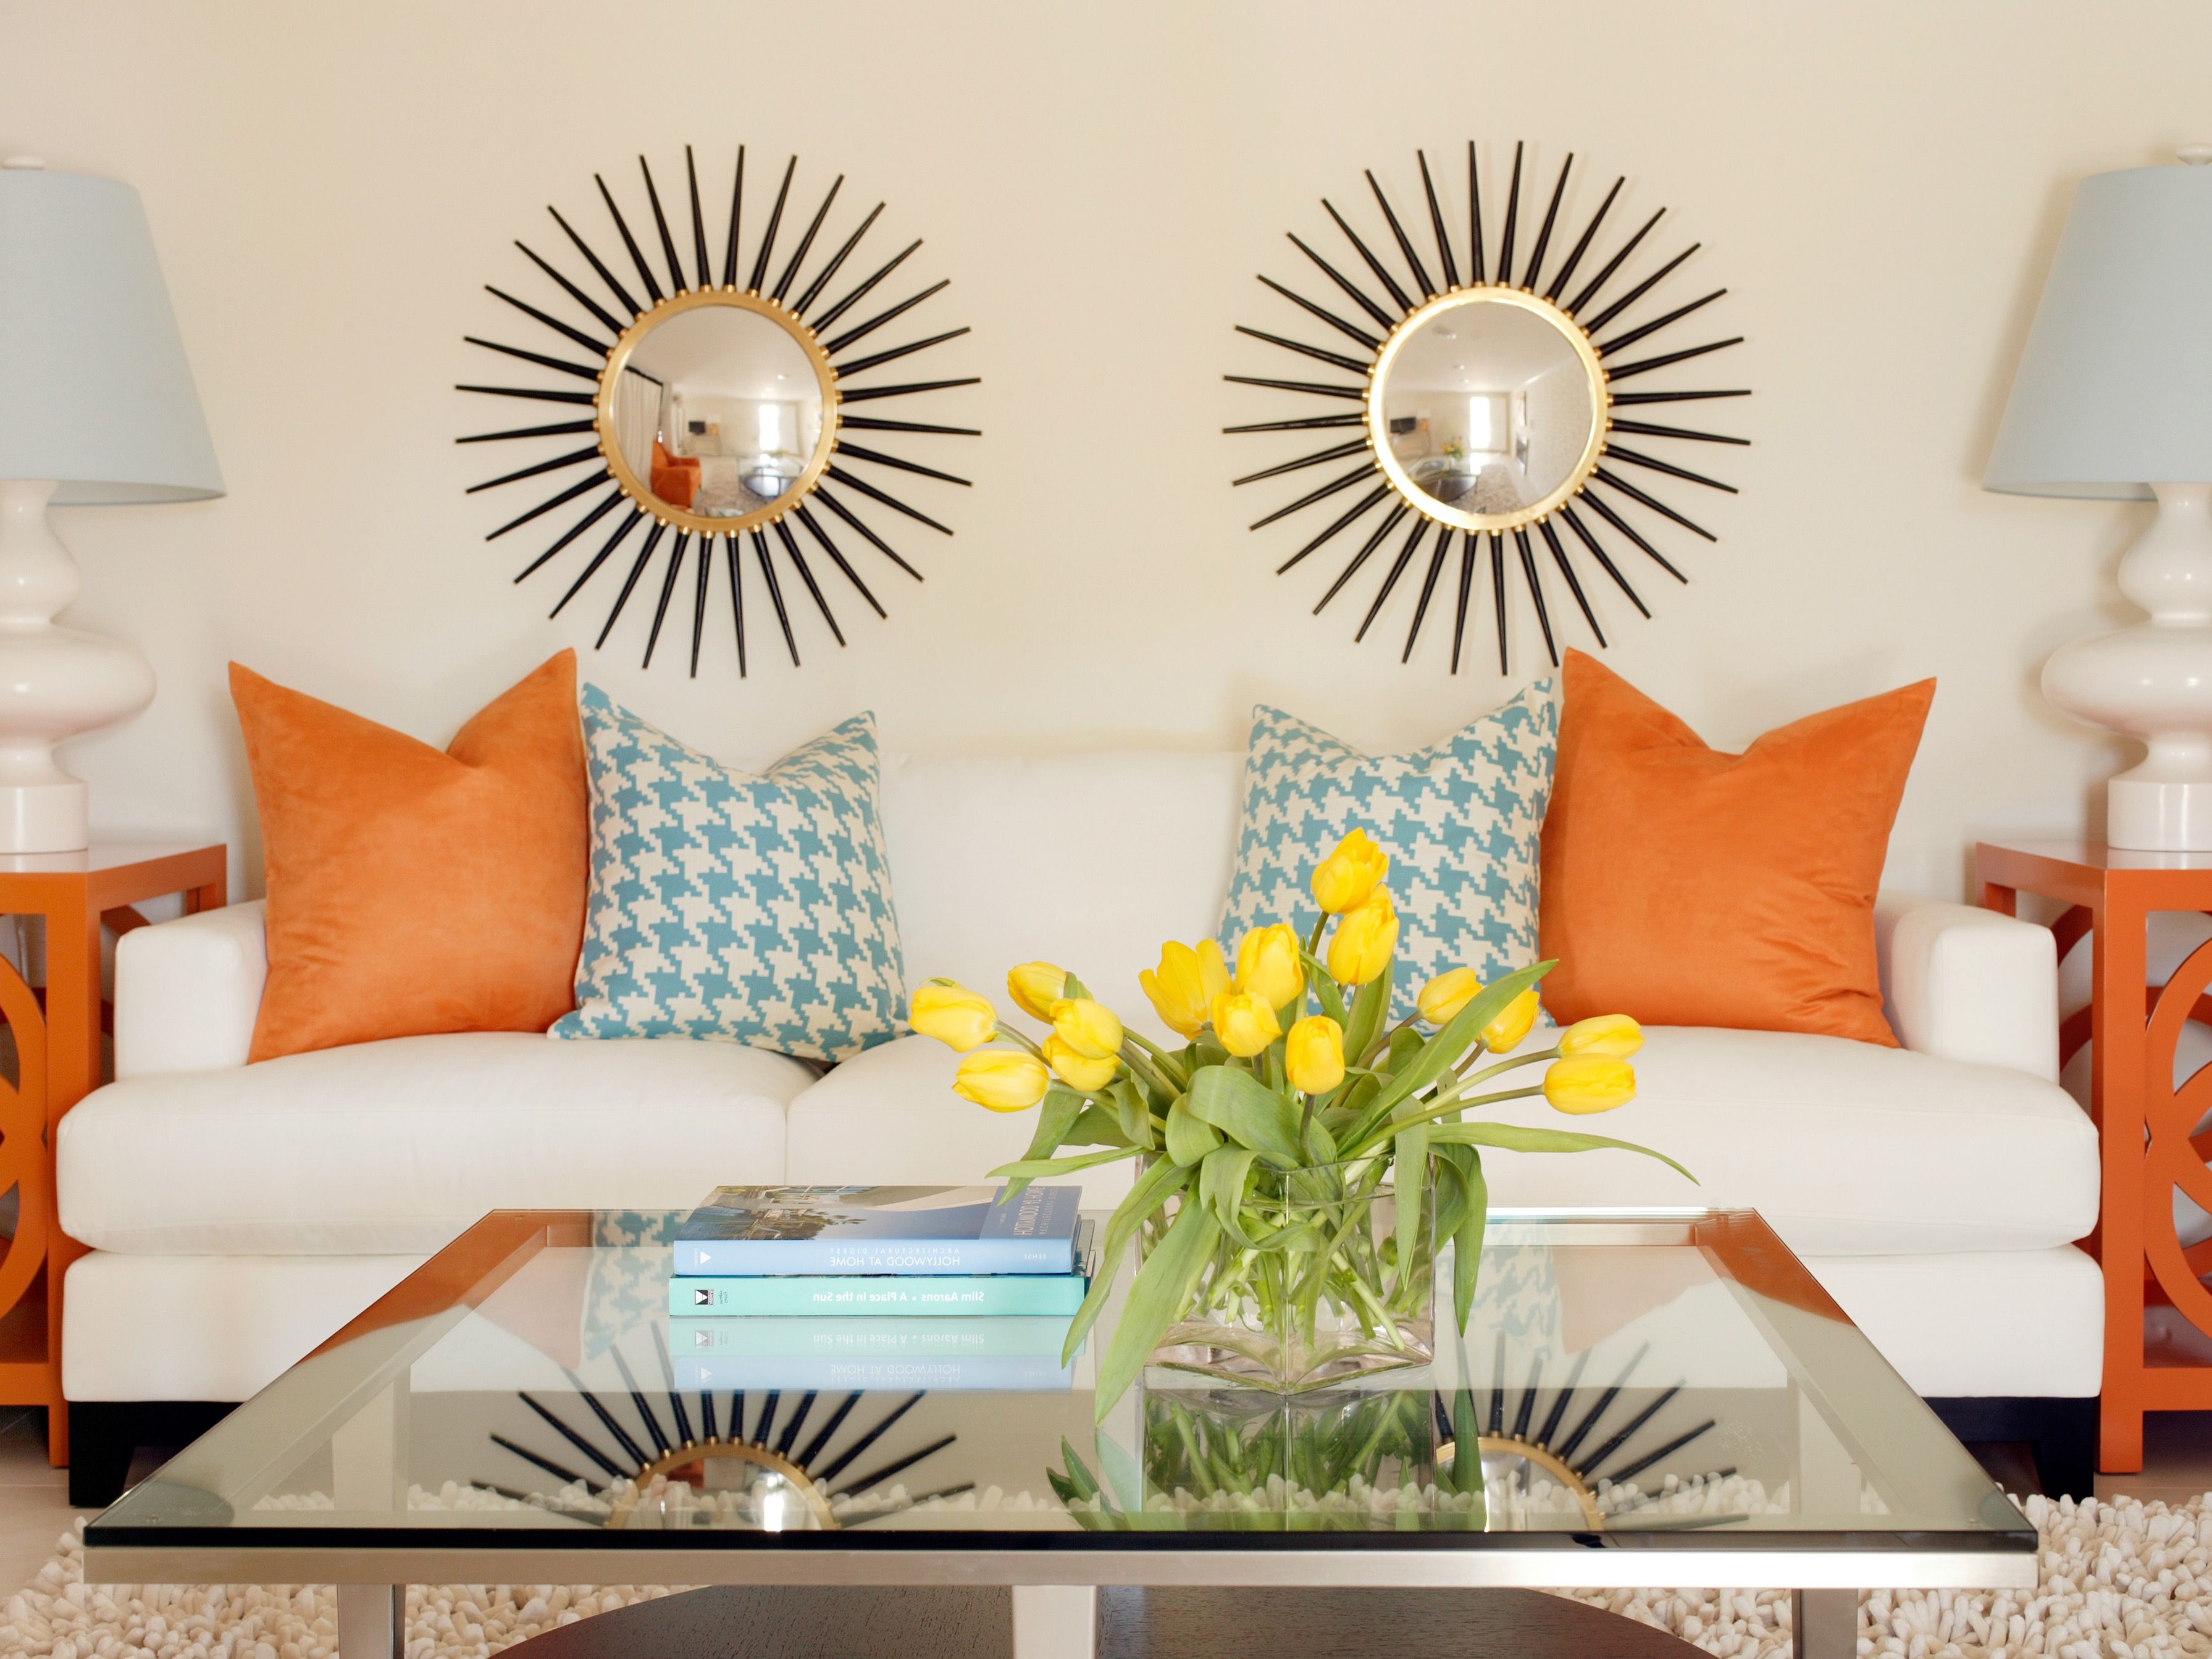 Tropical Inspired Living Room With Sunburst Mirrors (View 24 of 30)